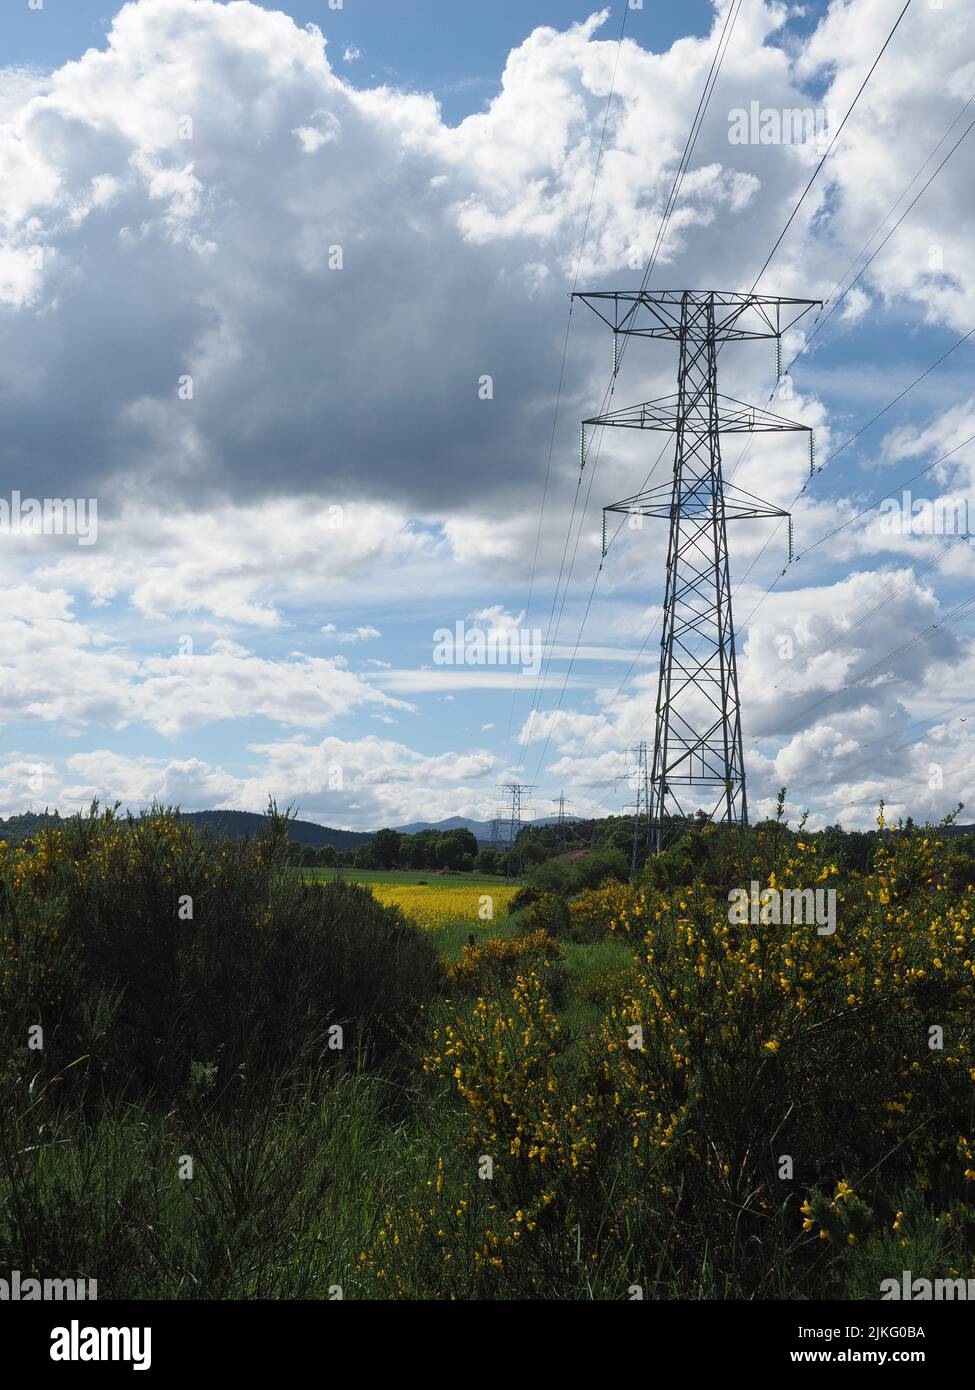 Electricity pylons in a field of rapeseed, with broom in foreground, & a cloudy blue sky & sunshine. Stock Photo